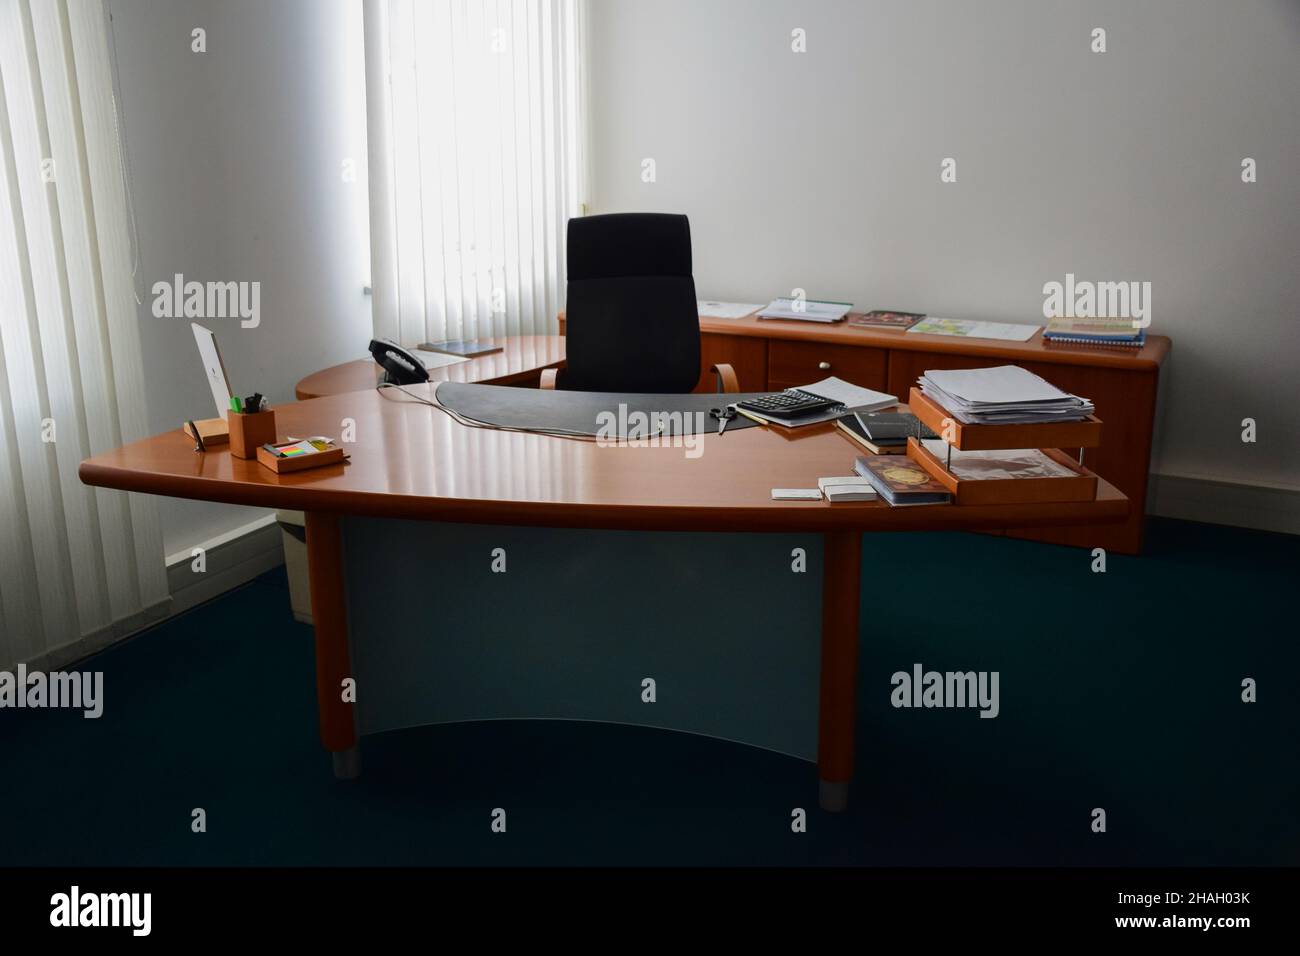 Work office space with an office chair, brown wooden table and various items on it near two windows. Front view Stock Photo